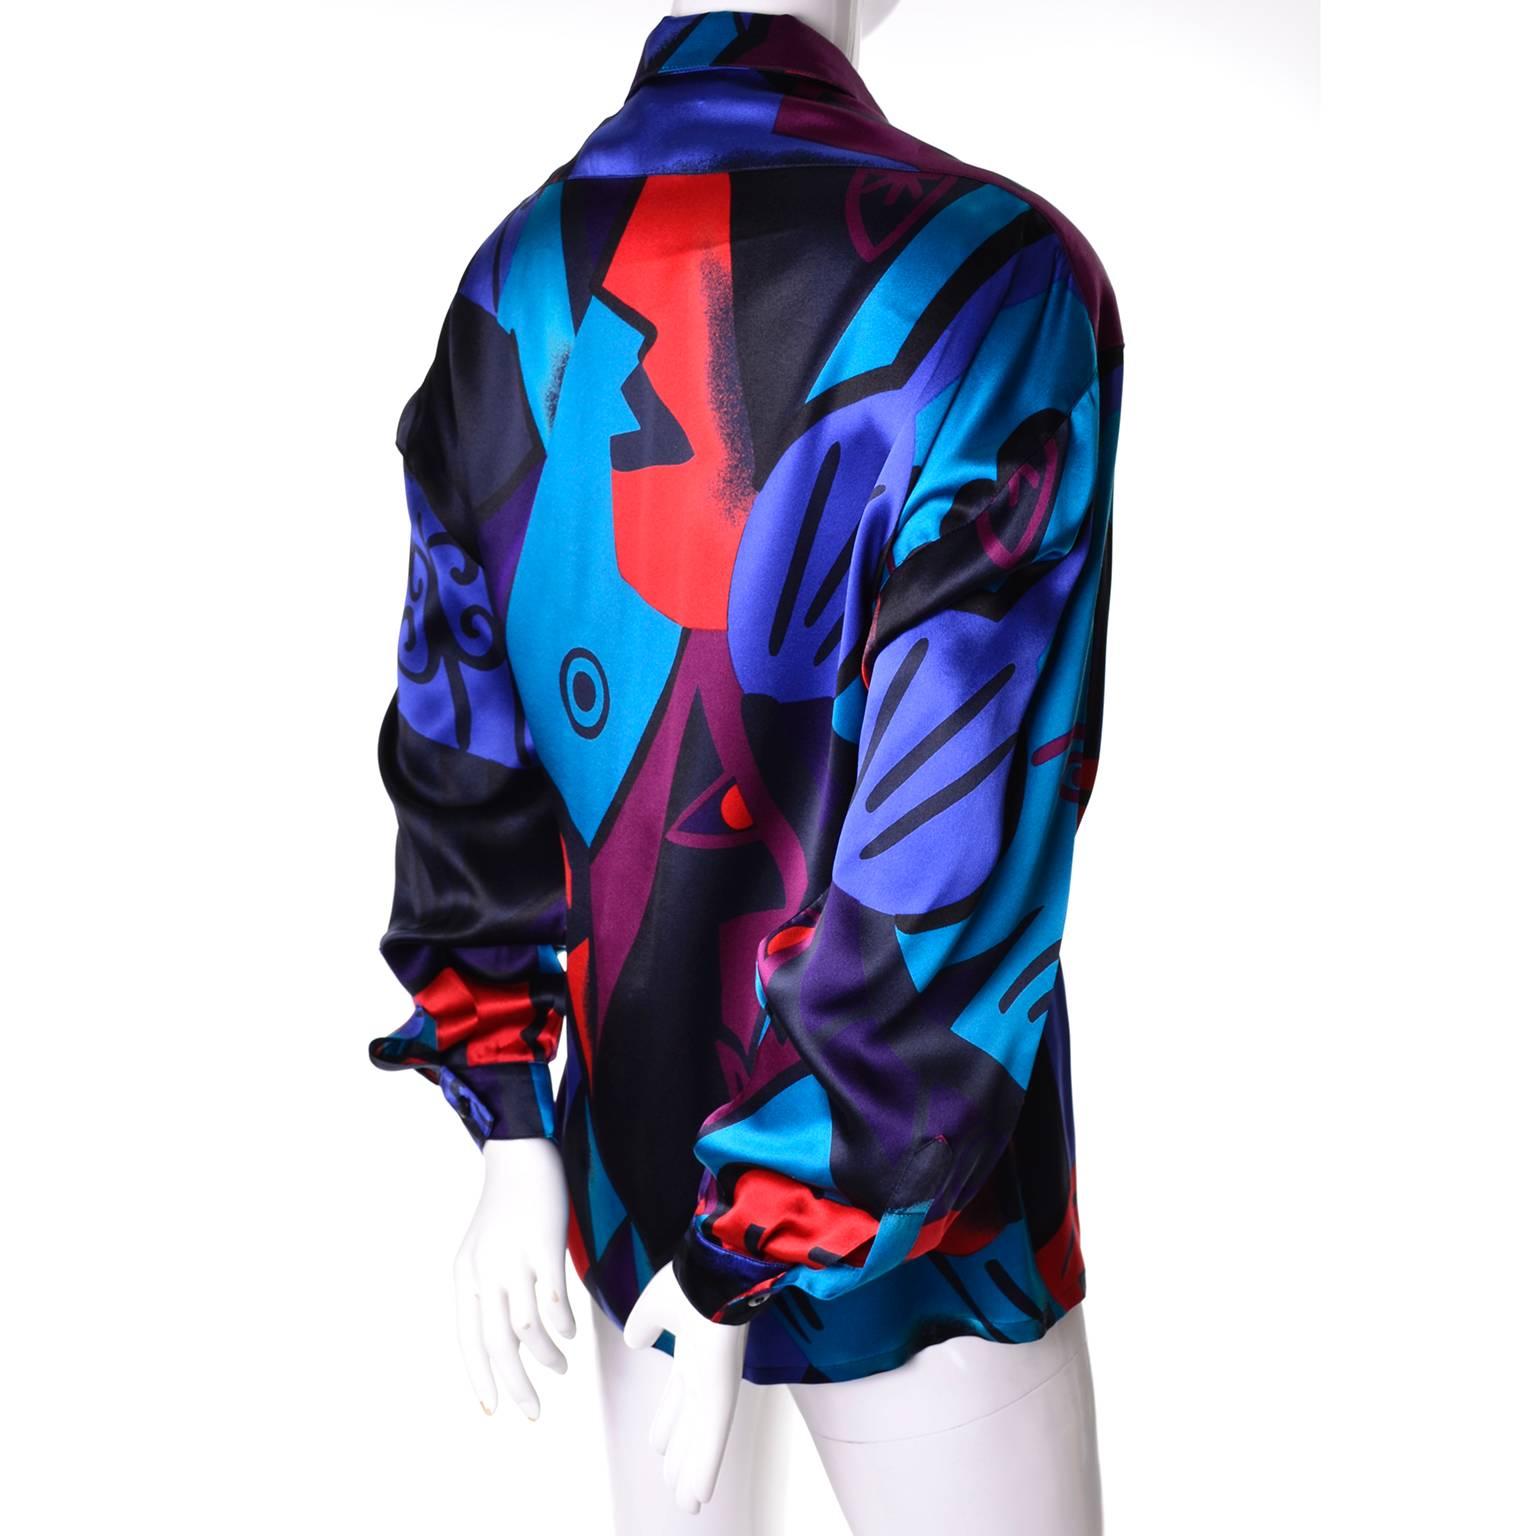 This beautiful 100% silk vintage blouse was designed for Escada by Margaretha Ley. The pattern is made up of abstract swirls and geometric shapes in black, red, green and blue.  Labeled a size 38 and made in West Germany, this top has shoulder pads